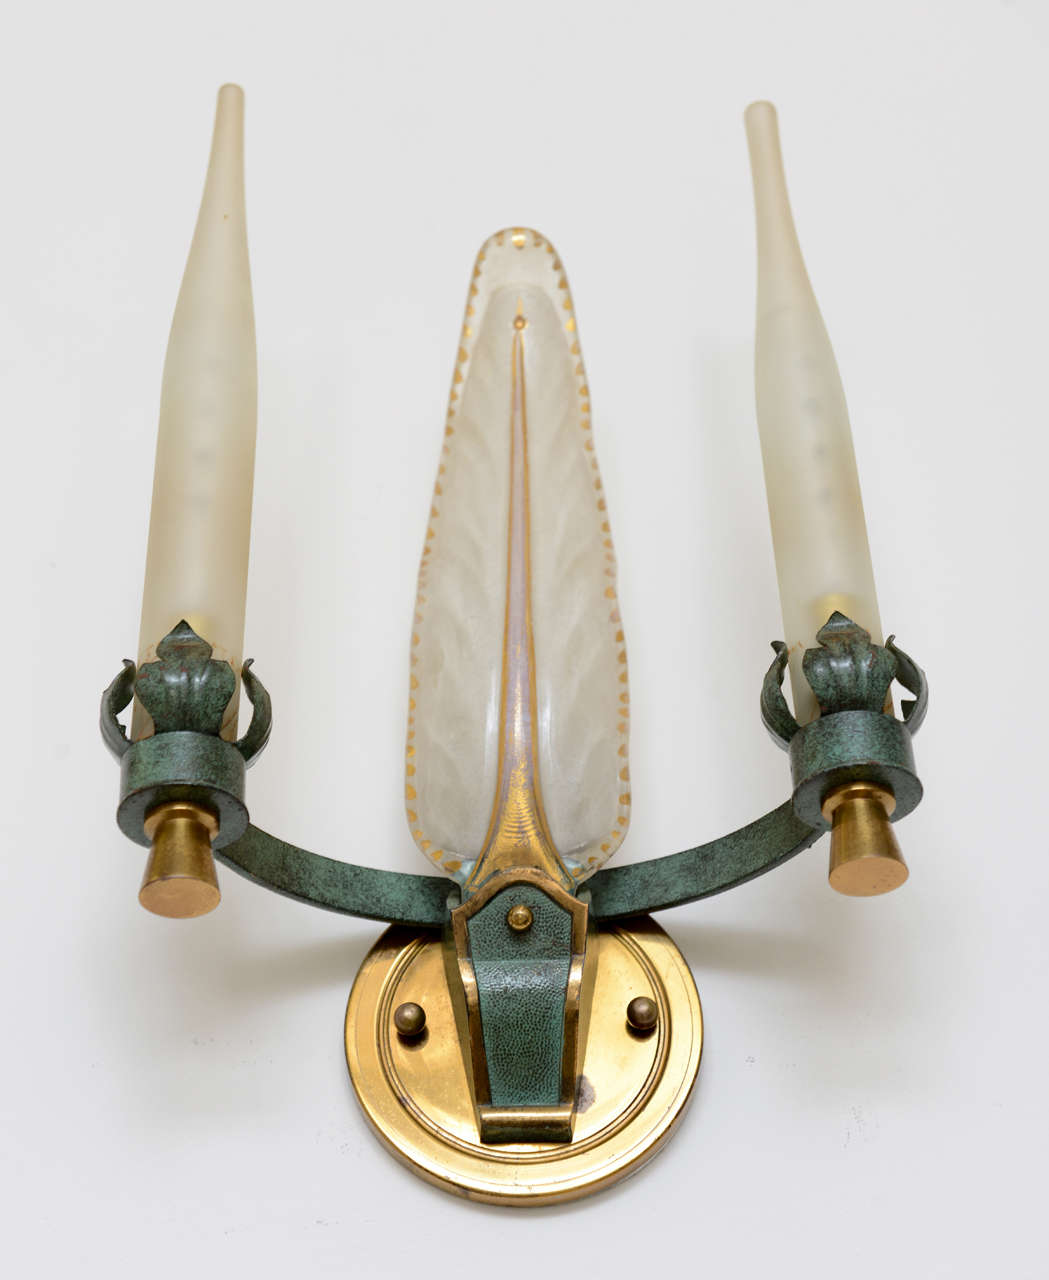 Mid-20th Century Pair of French Art Deco-Moderne Wall Sconces, Glass, Brass and Verdi Metal 